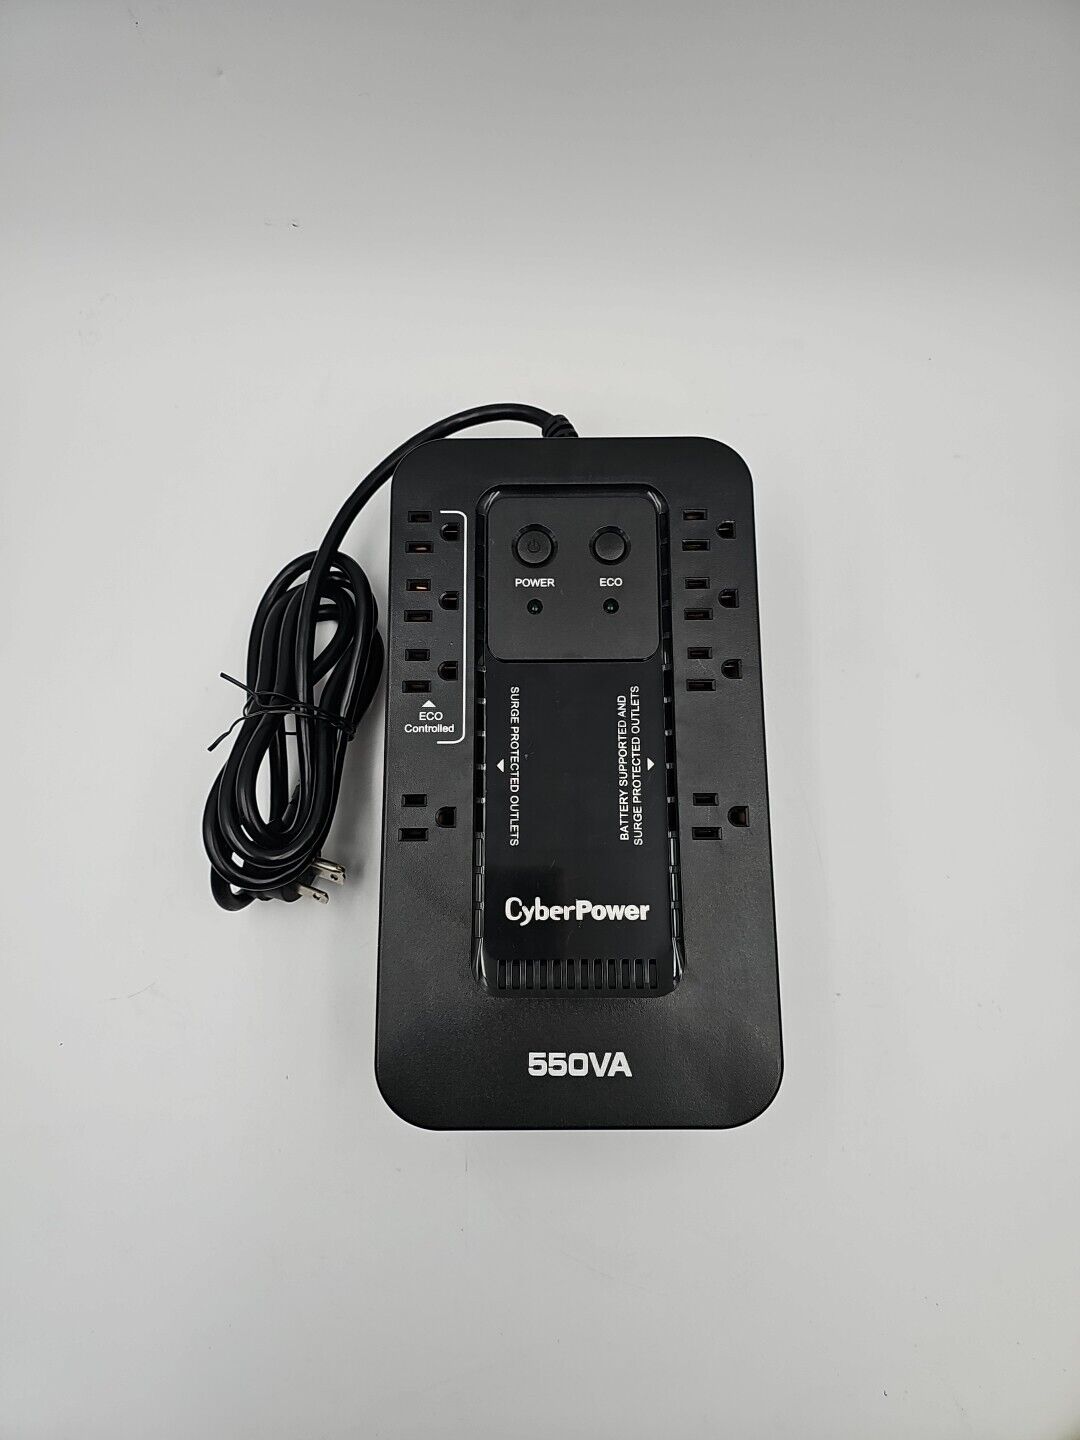 CyberPower EC550G Ecologic Battery Backup & Surge Protector 550VA/330W 8 Outlets